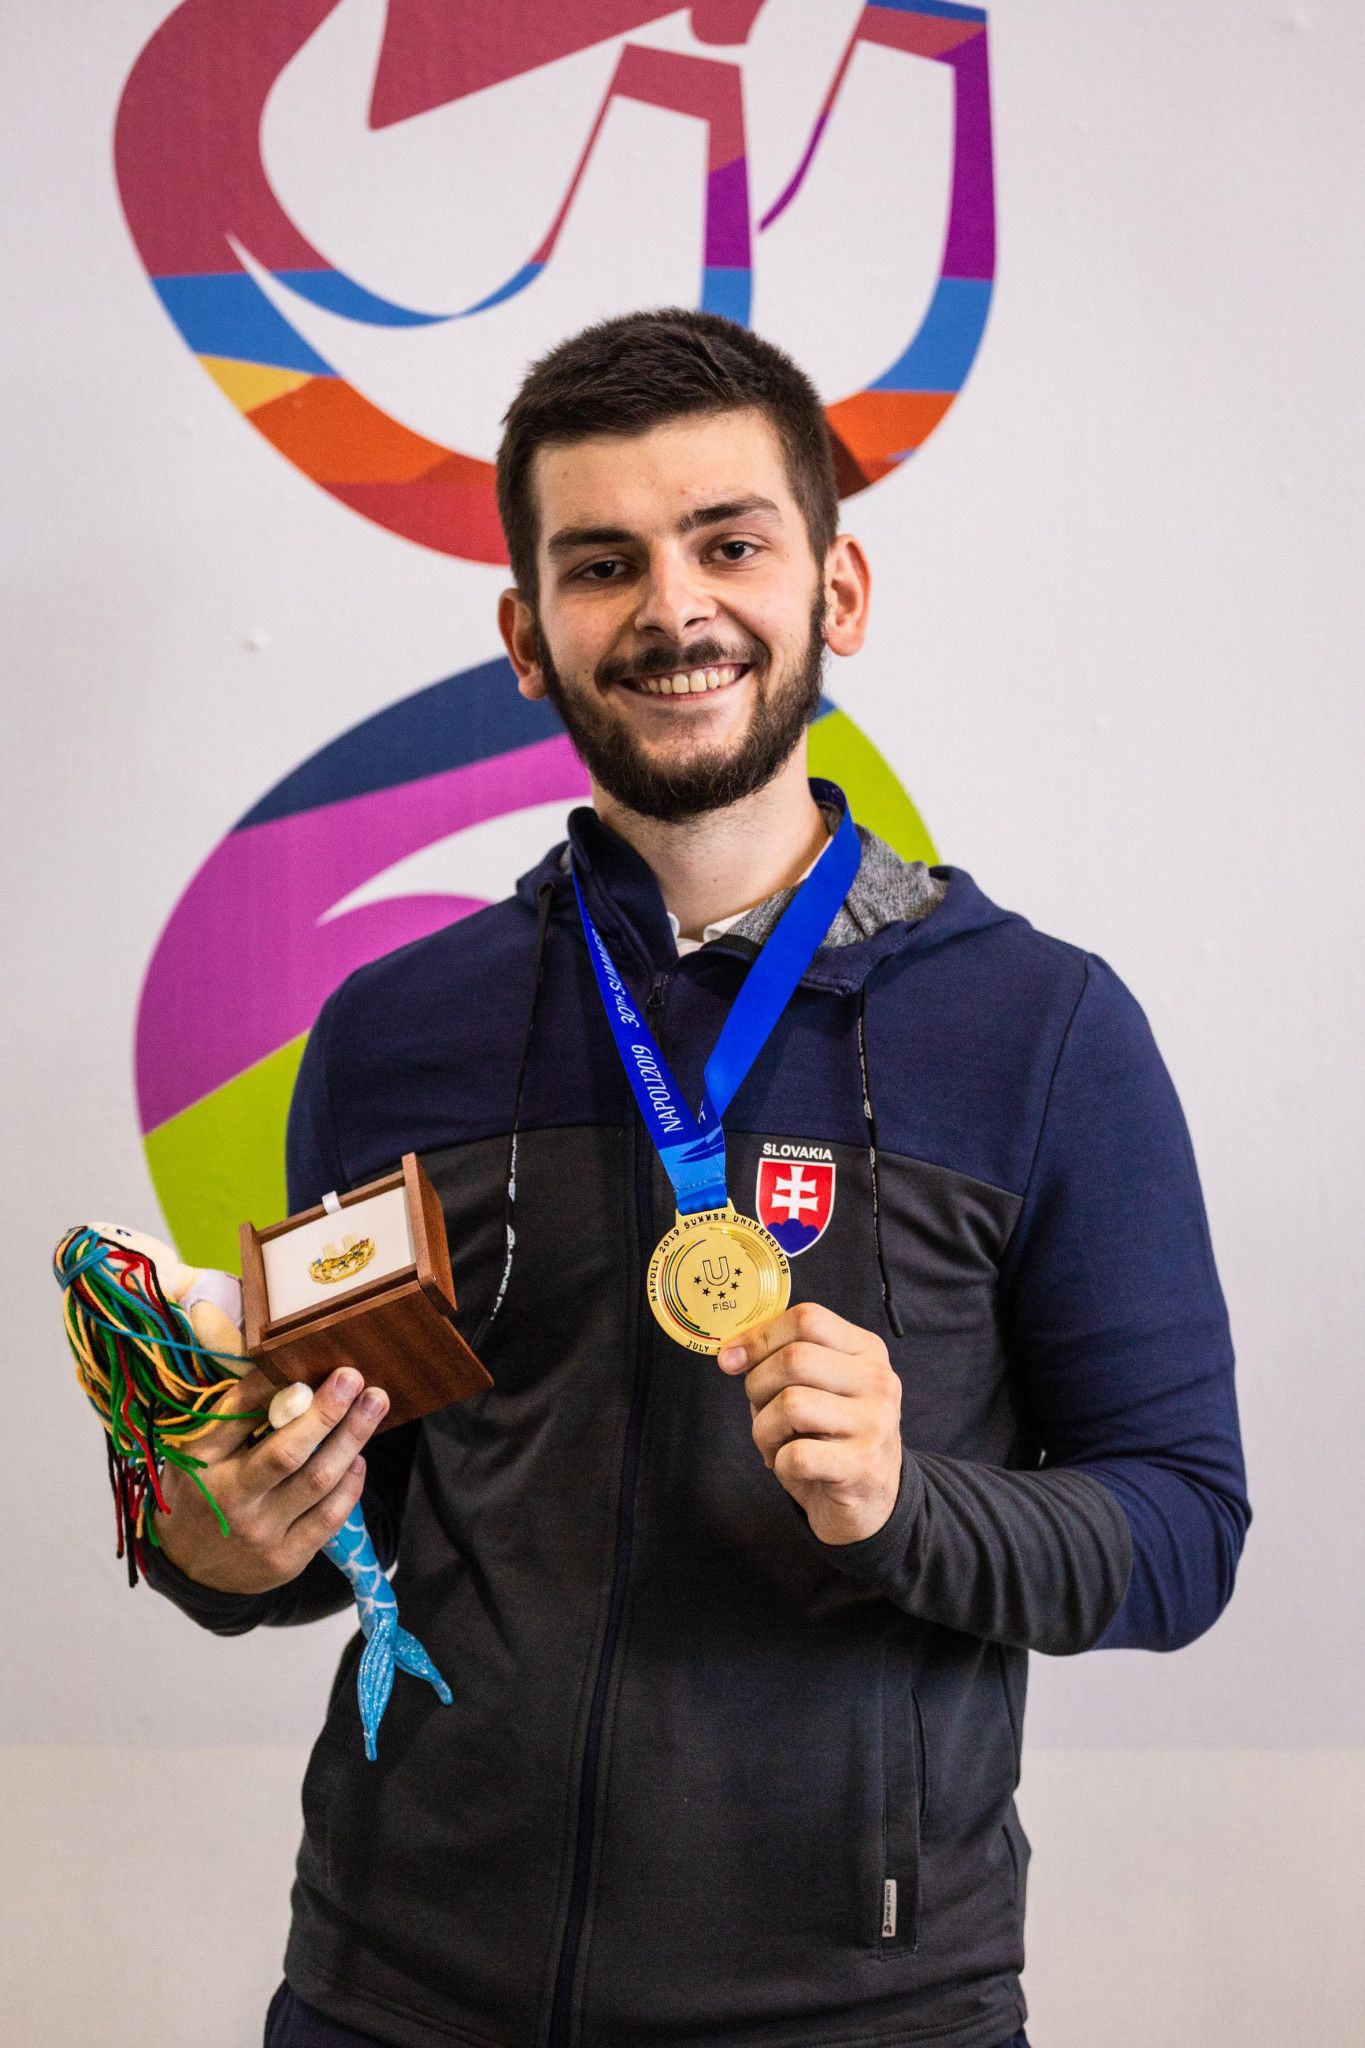 Patrik Jany of Slovakia showed nerves of steel to win the men's 10m air rifle contest ©Naples 2019